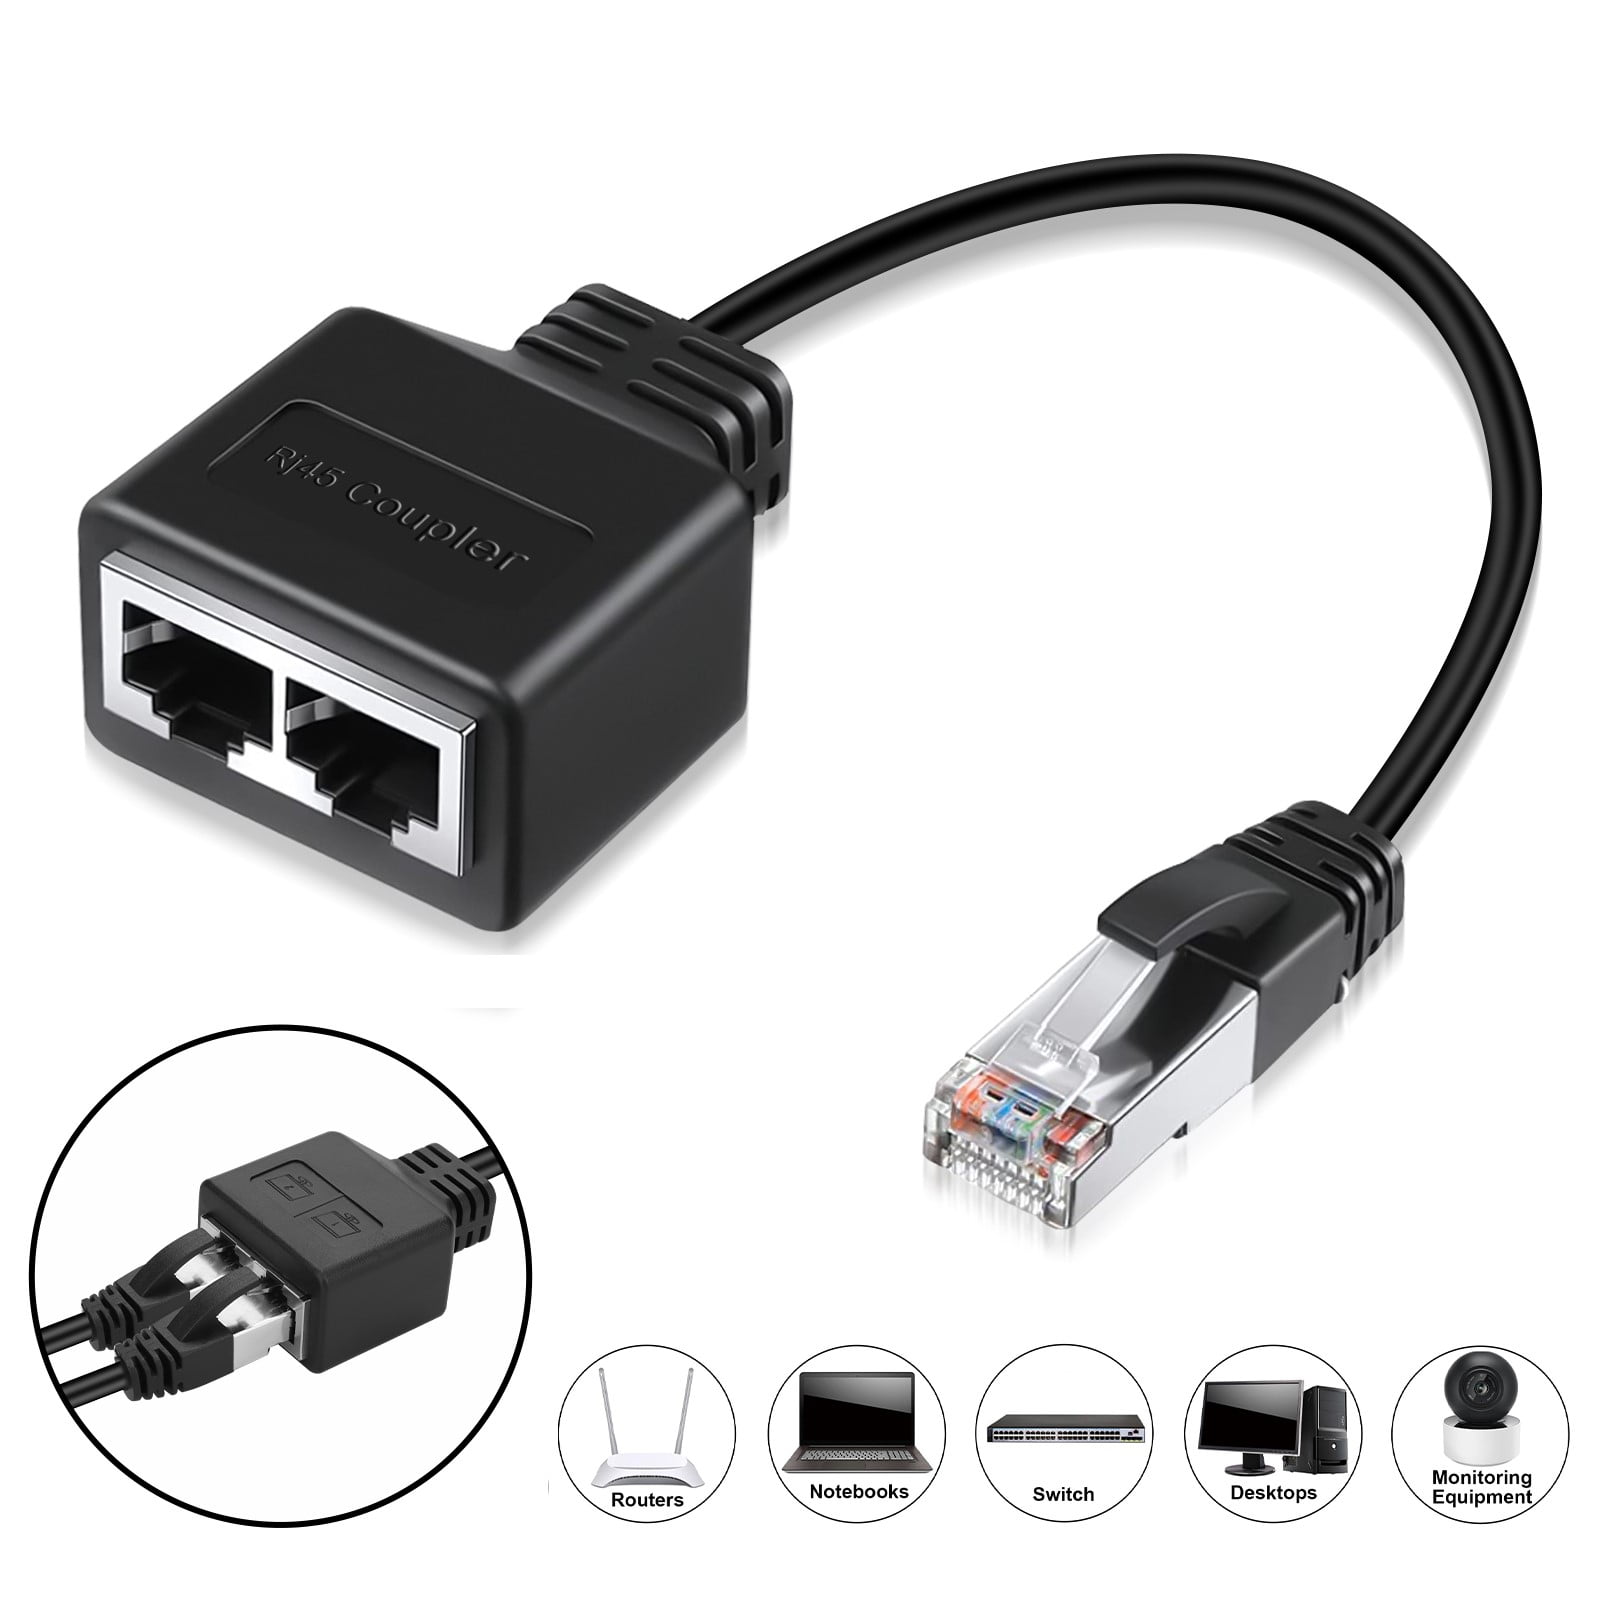 Ethernet Splitter, Gigabit High Speed RJ45 LAN Network Switch for CAT 5 6 7  8 Internet Cable, 1 in 2 Out Support 2 Devices Working Simultaneously